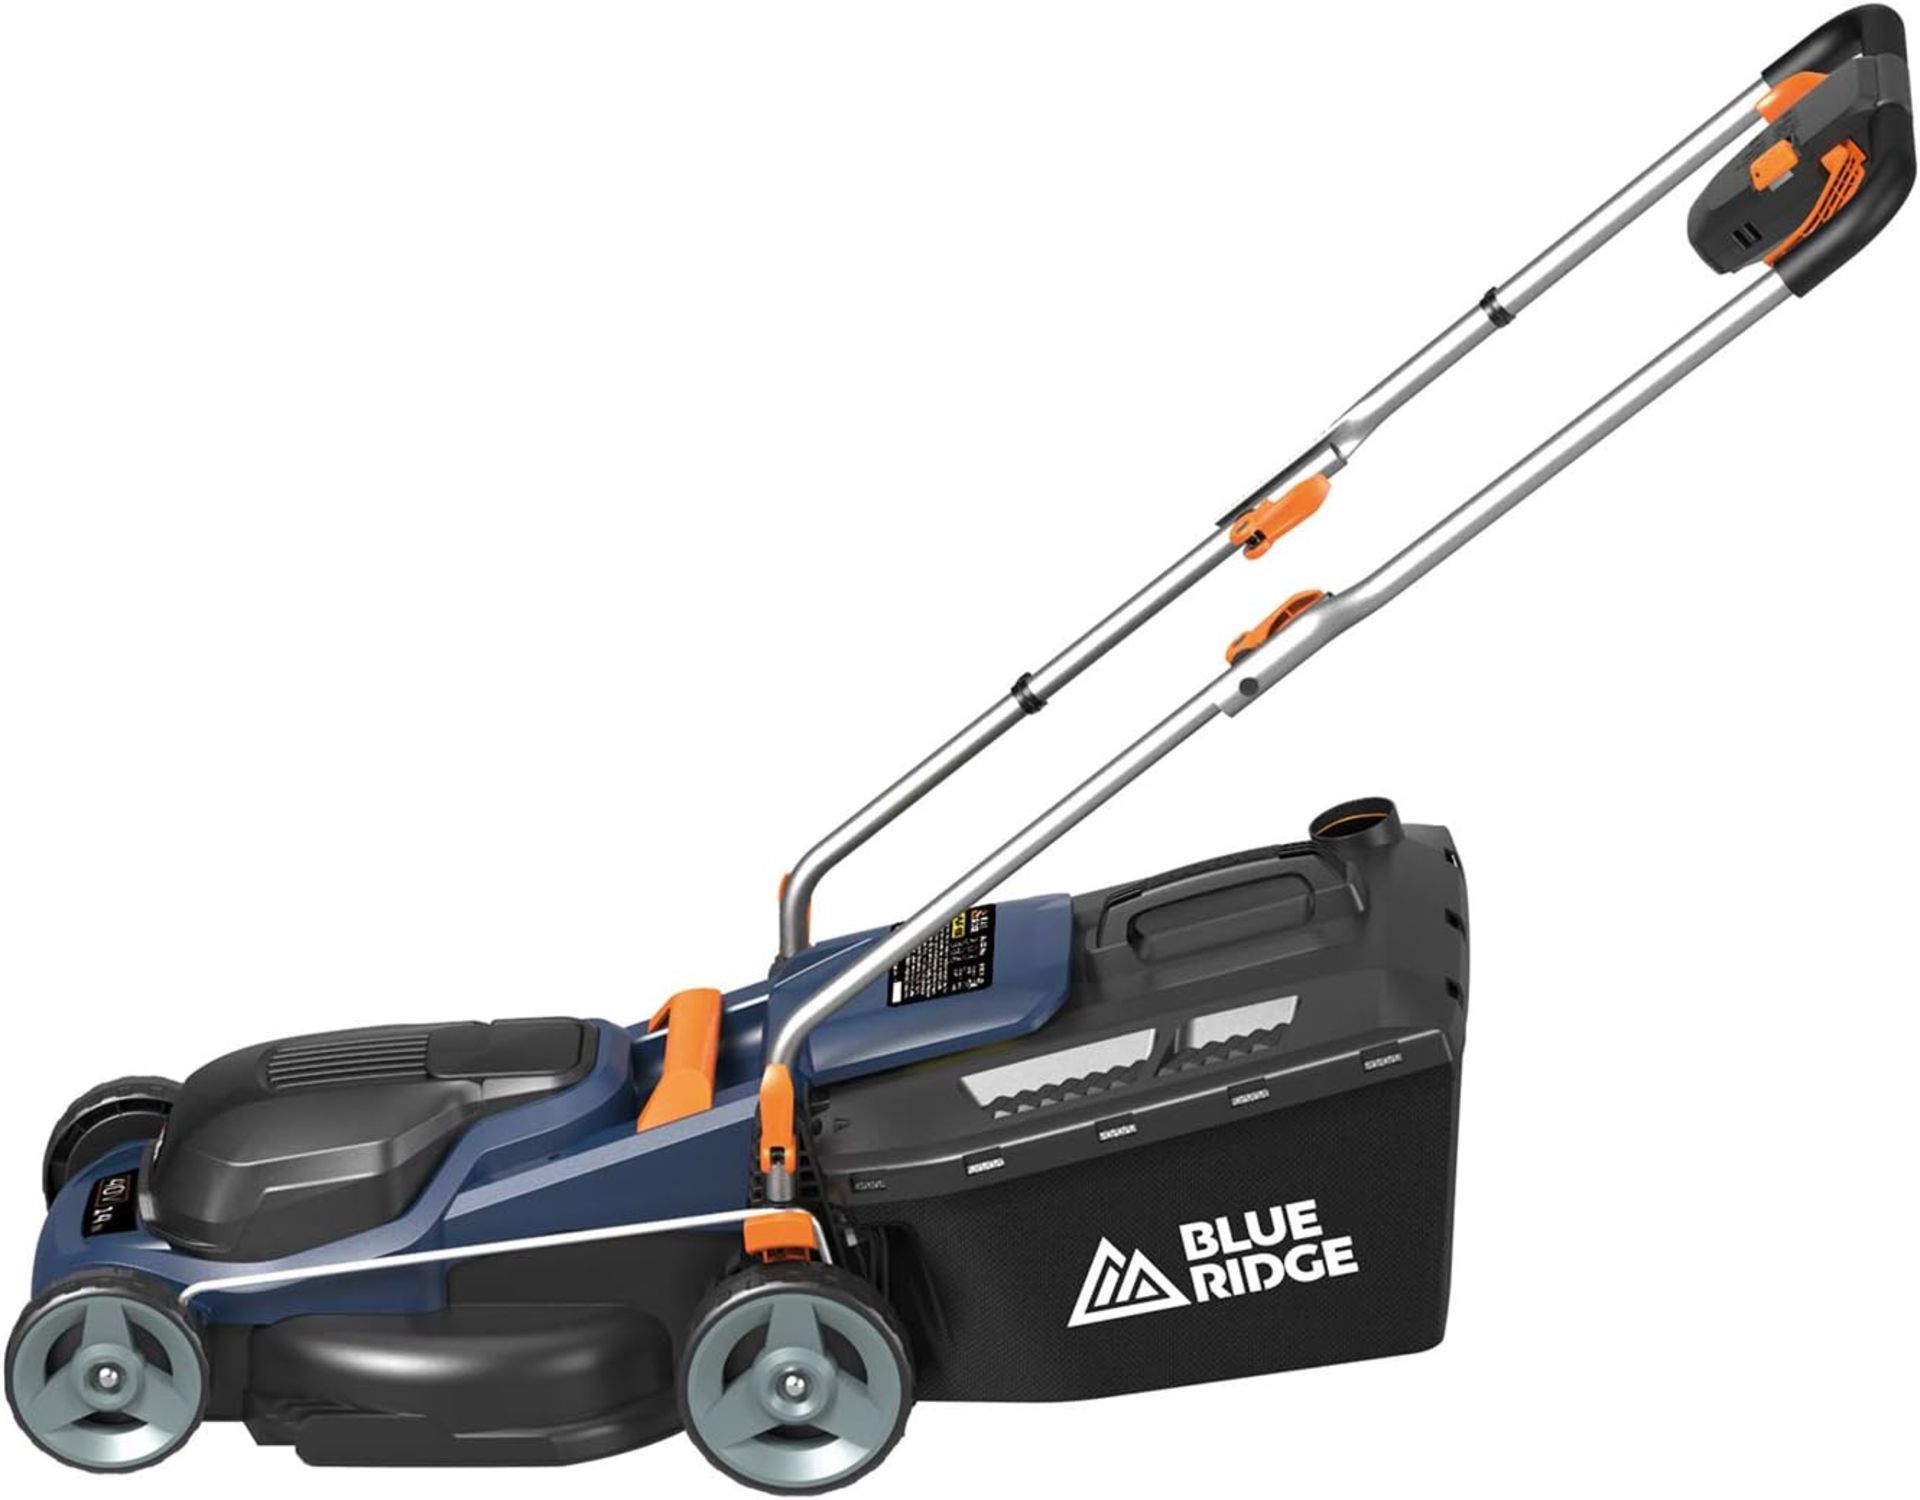 2x NEW & BOXED BLUE RIDGE 36V Cordless Lawnmower with 2.0 Ah Li-ion Battery. RRP £185 EACH. Powerful - Image 2 of 4